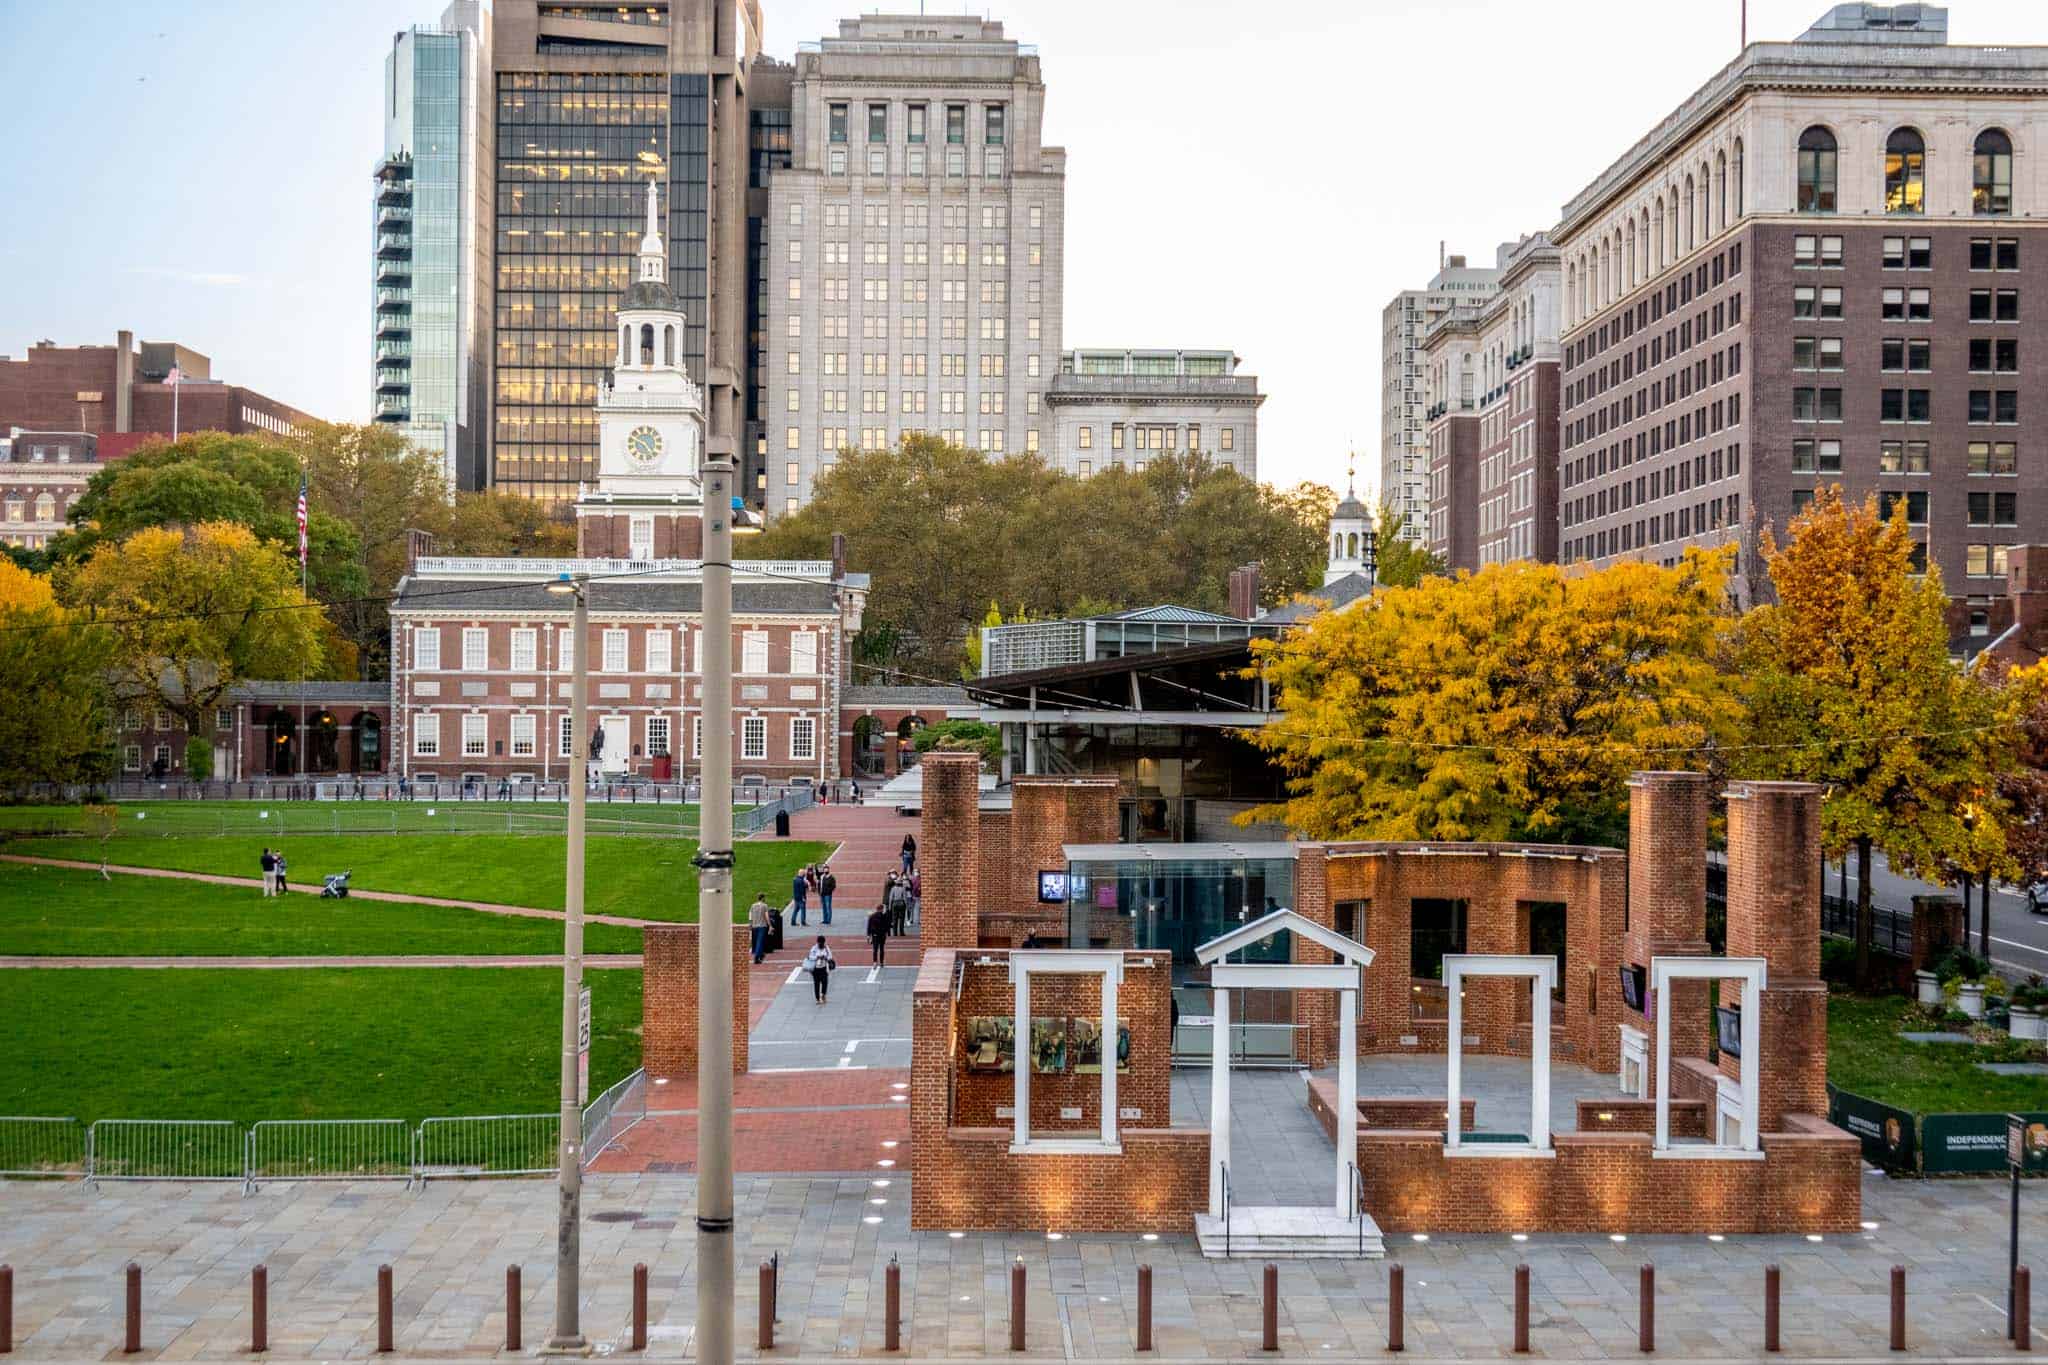 Independence Hall and other historical buildings along Independence Mall